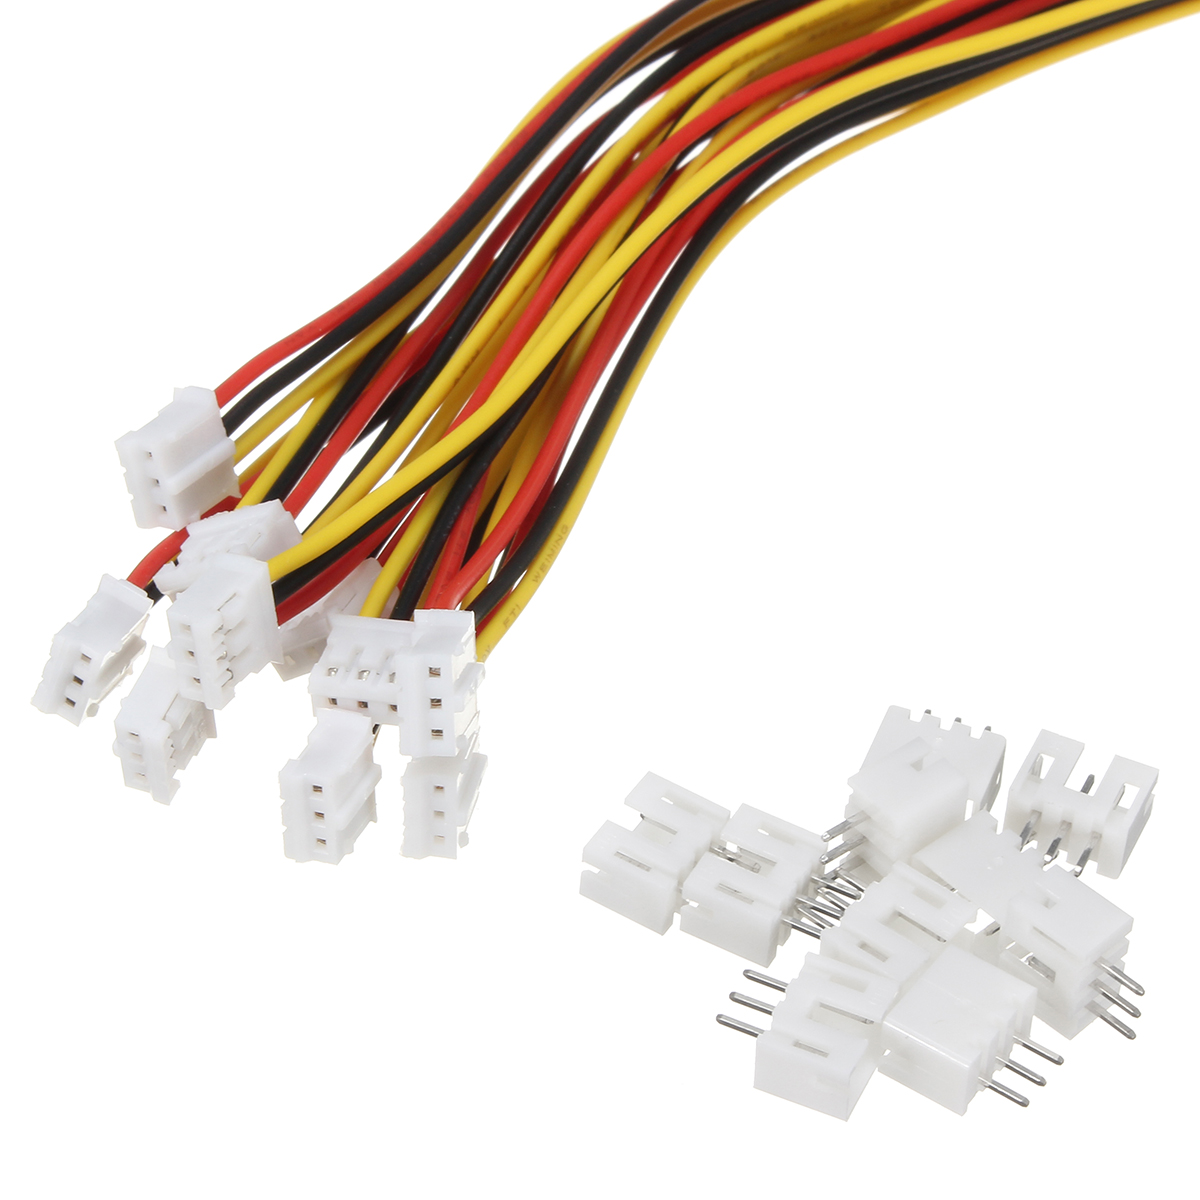 Excellwayreg-20Pcs-Mini-Micro-JST-20-PH-3-Pin-Connector-Plug-With-30cm-Wires-Cables-1147294-1